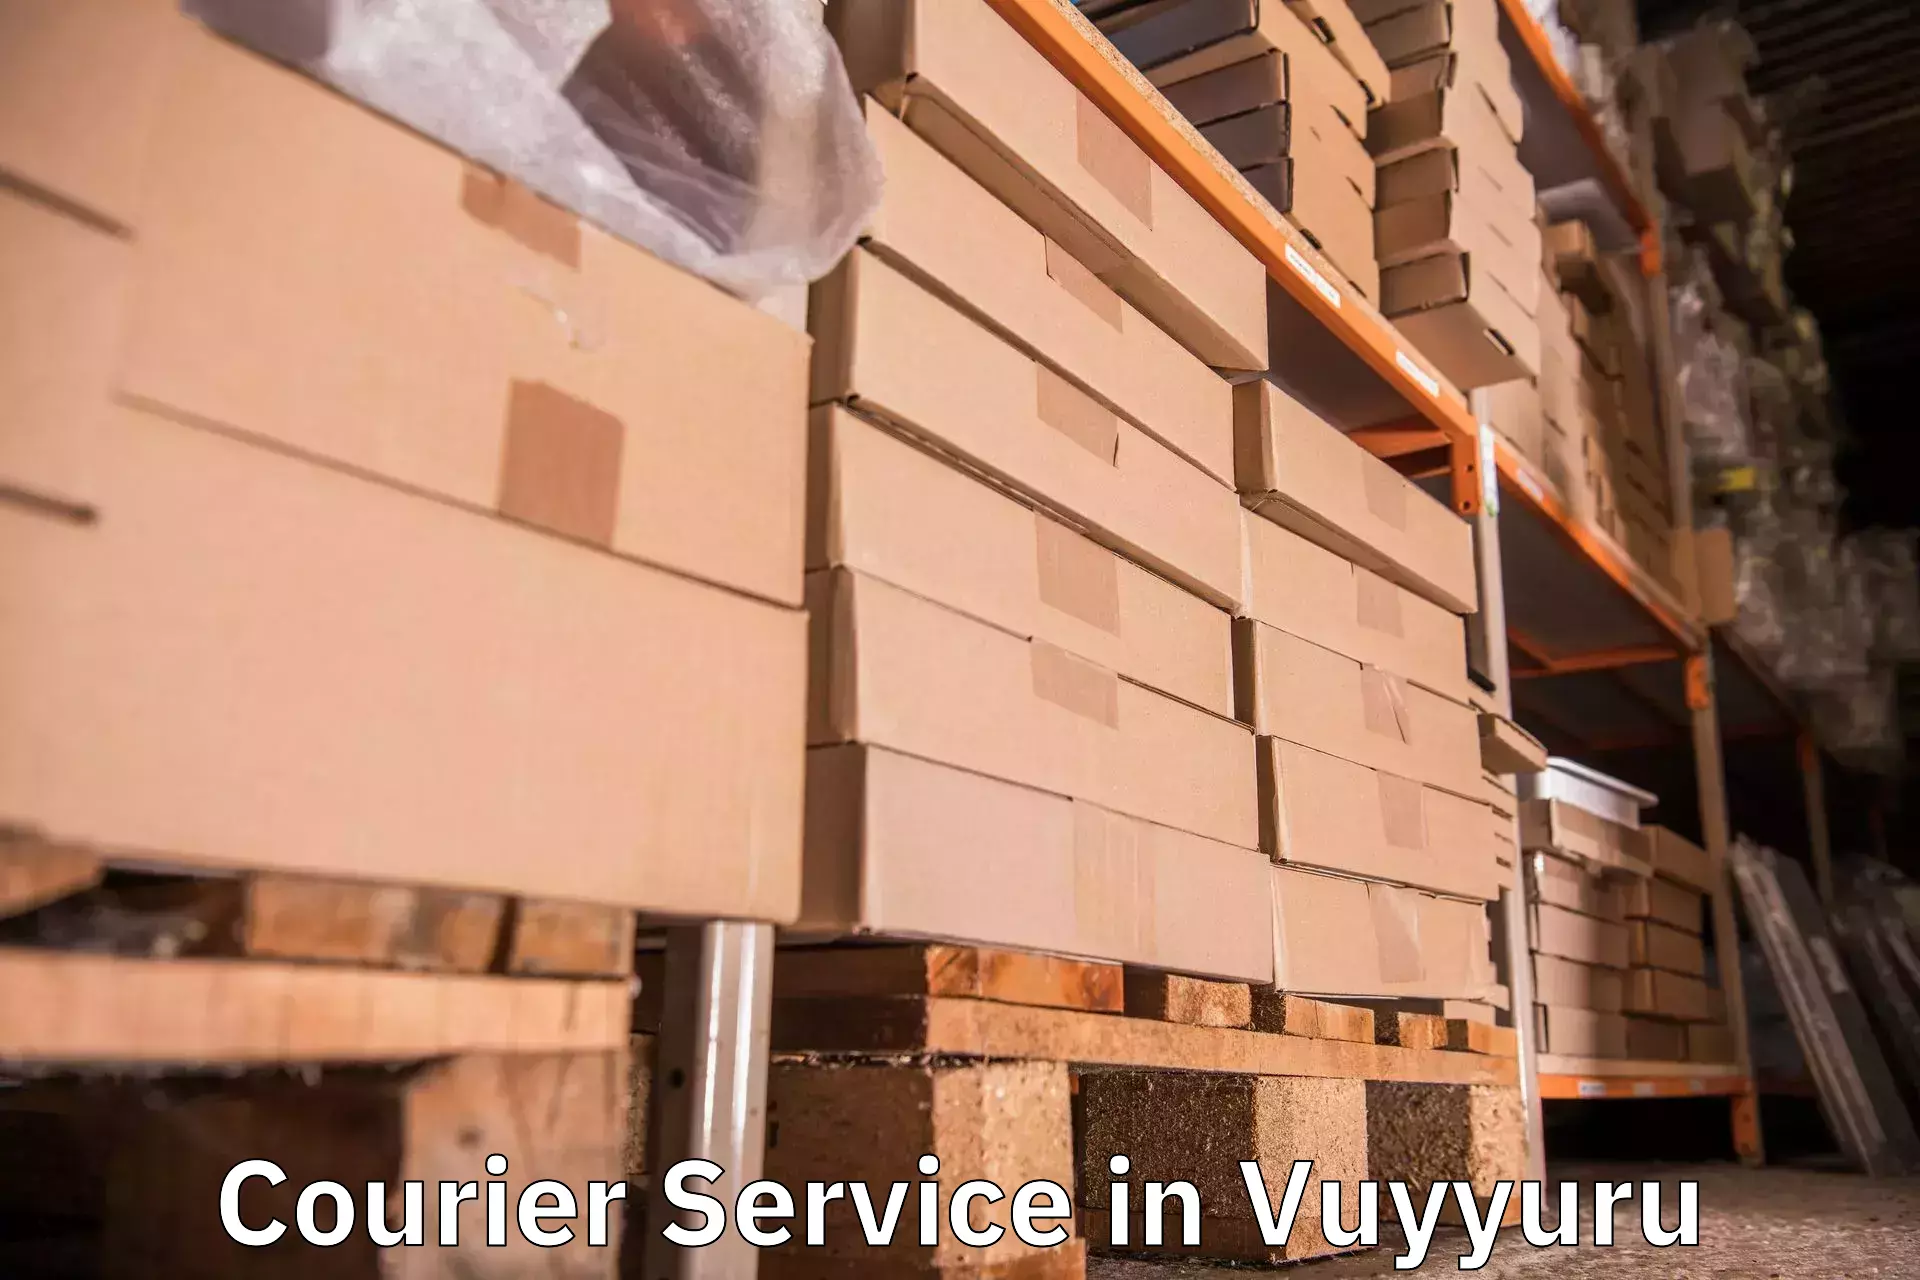 Personal parcel delivery in Vuyyuru